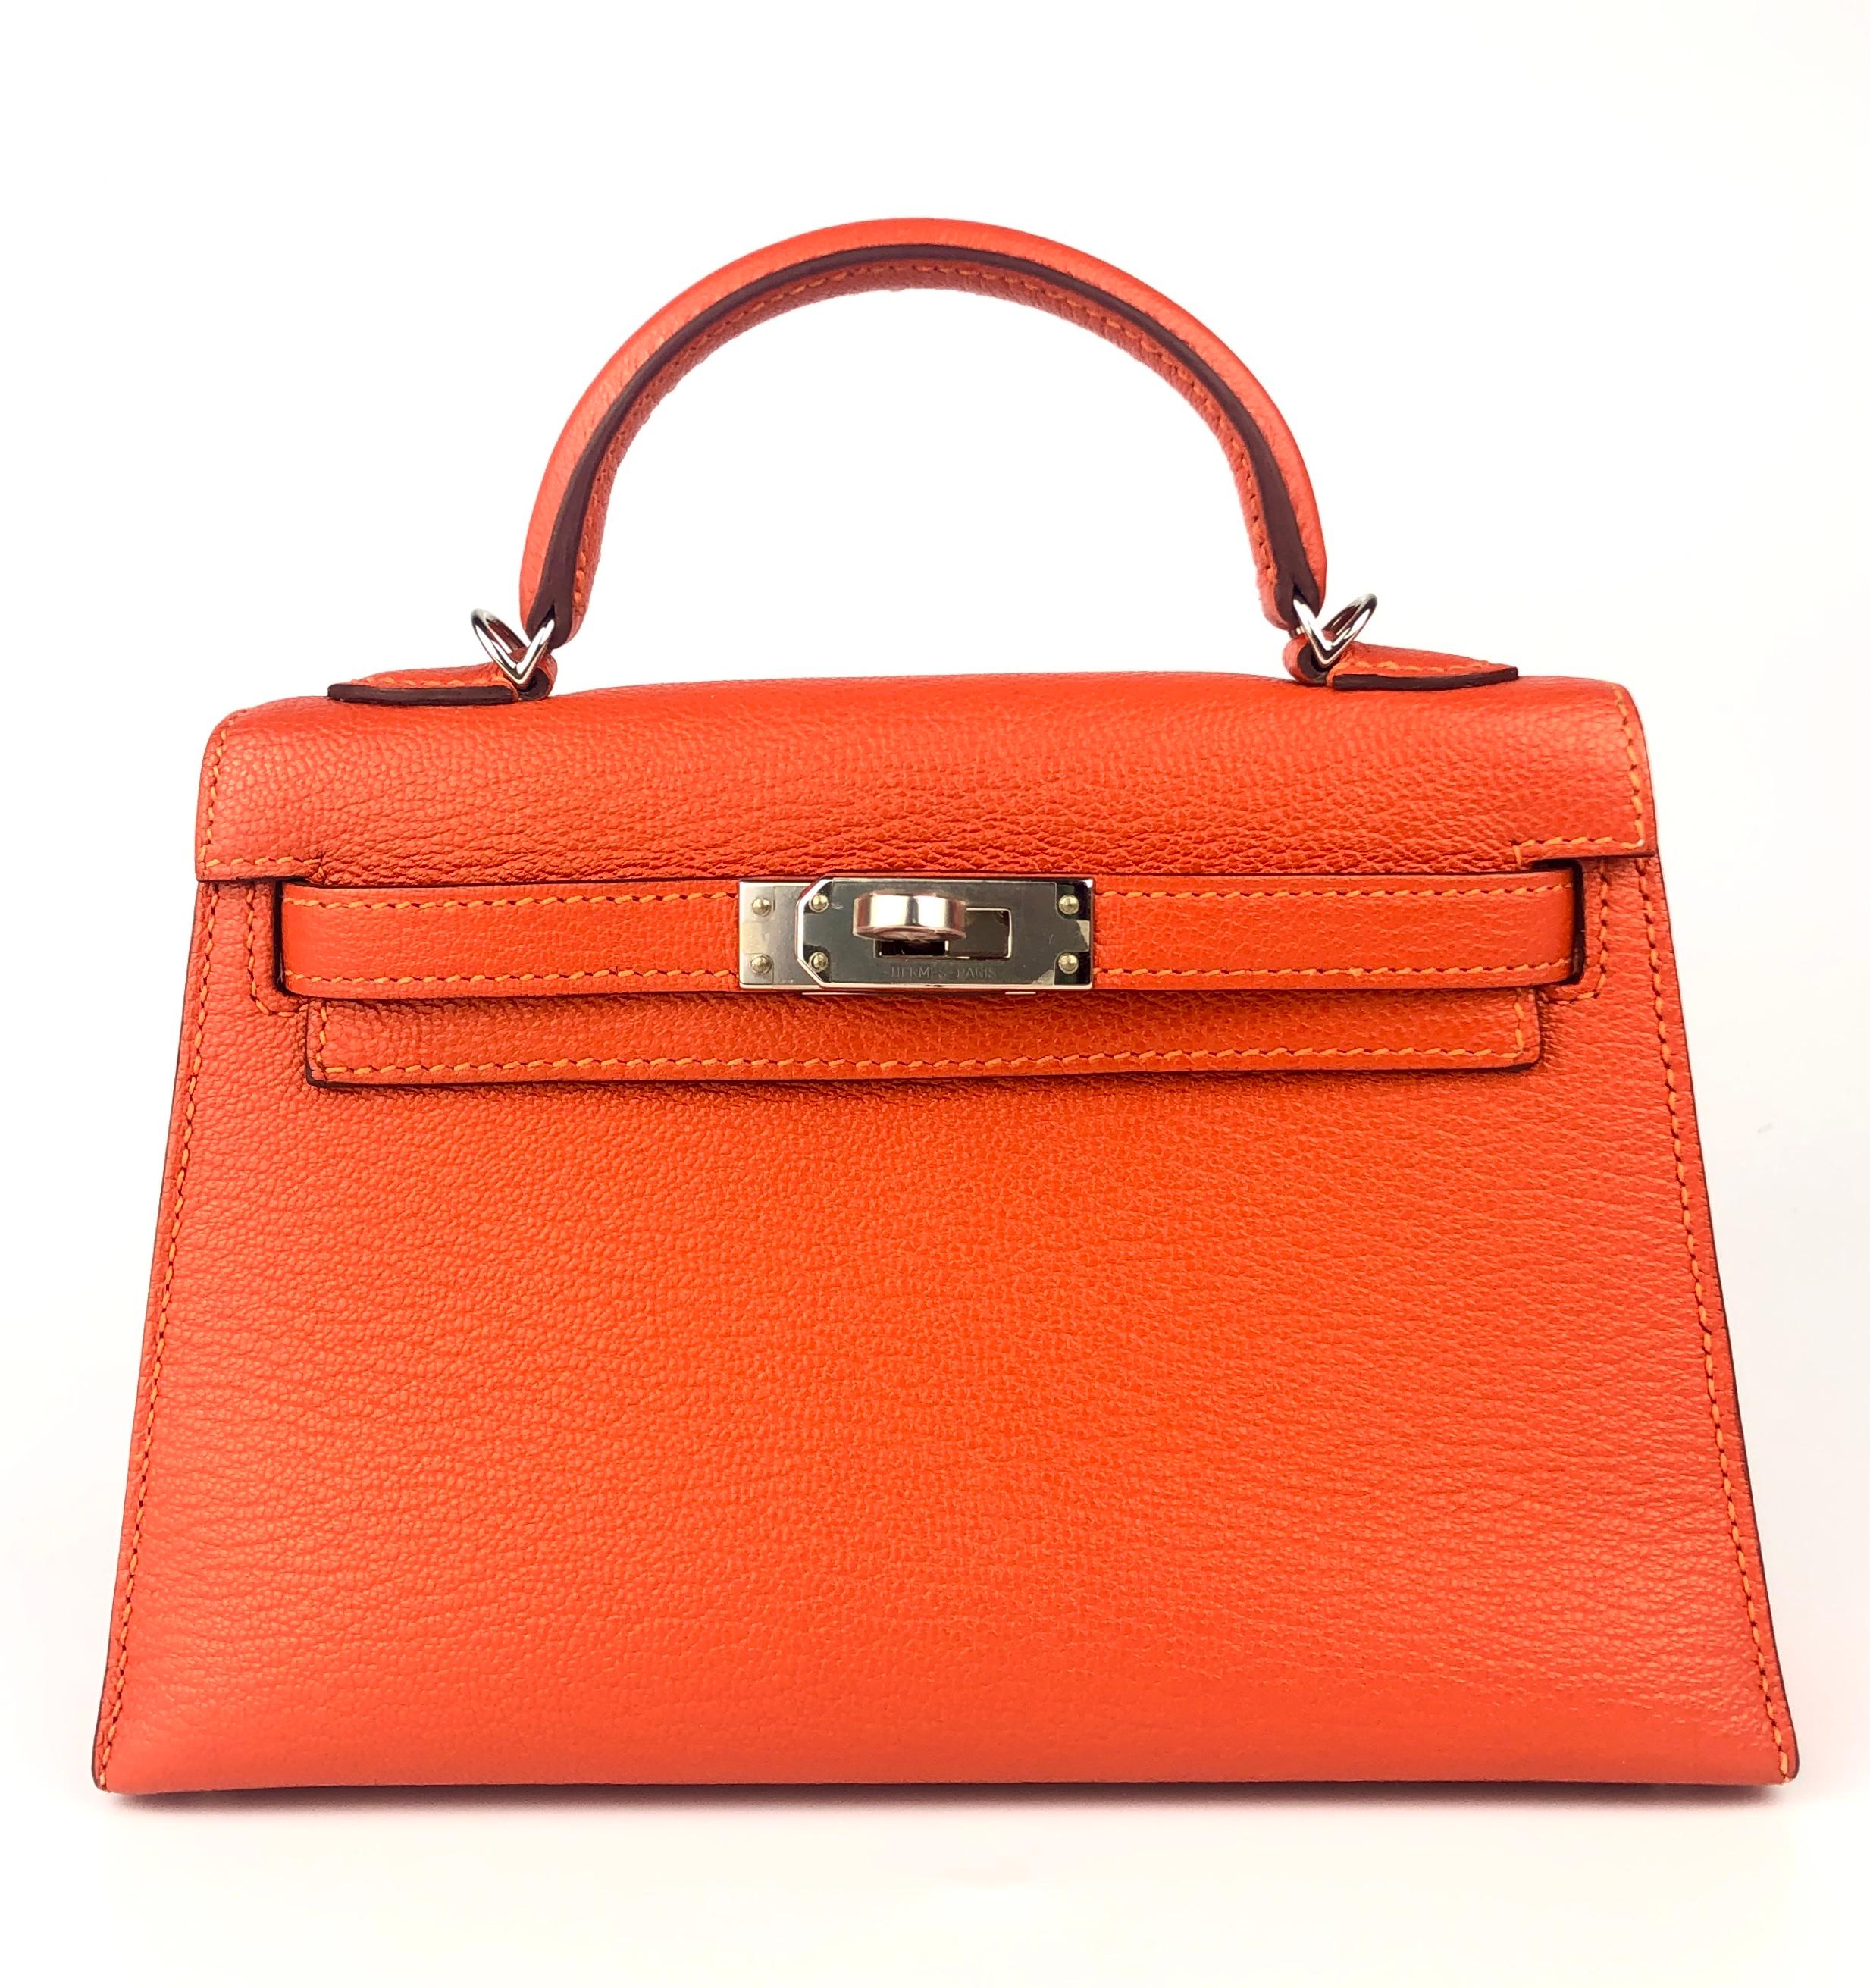 As New Ultra Rare and Hardest to get Hermes Mini Kelly 20 Verso Feu Orange Chèvre Leather Rose Eglantine Interior  Complimented by Palladium Hardware. D Stamp 2019. Includes all Accessories and Box.

Shop with Confidence from Lux Addicts. We are a